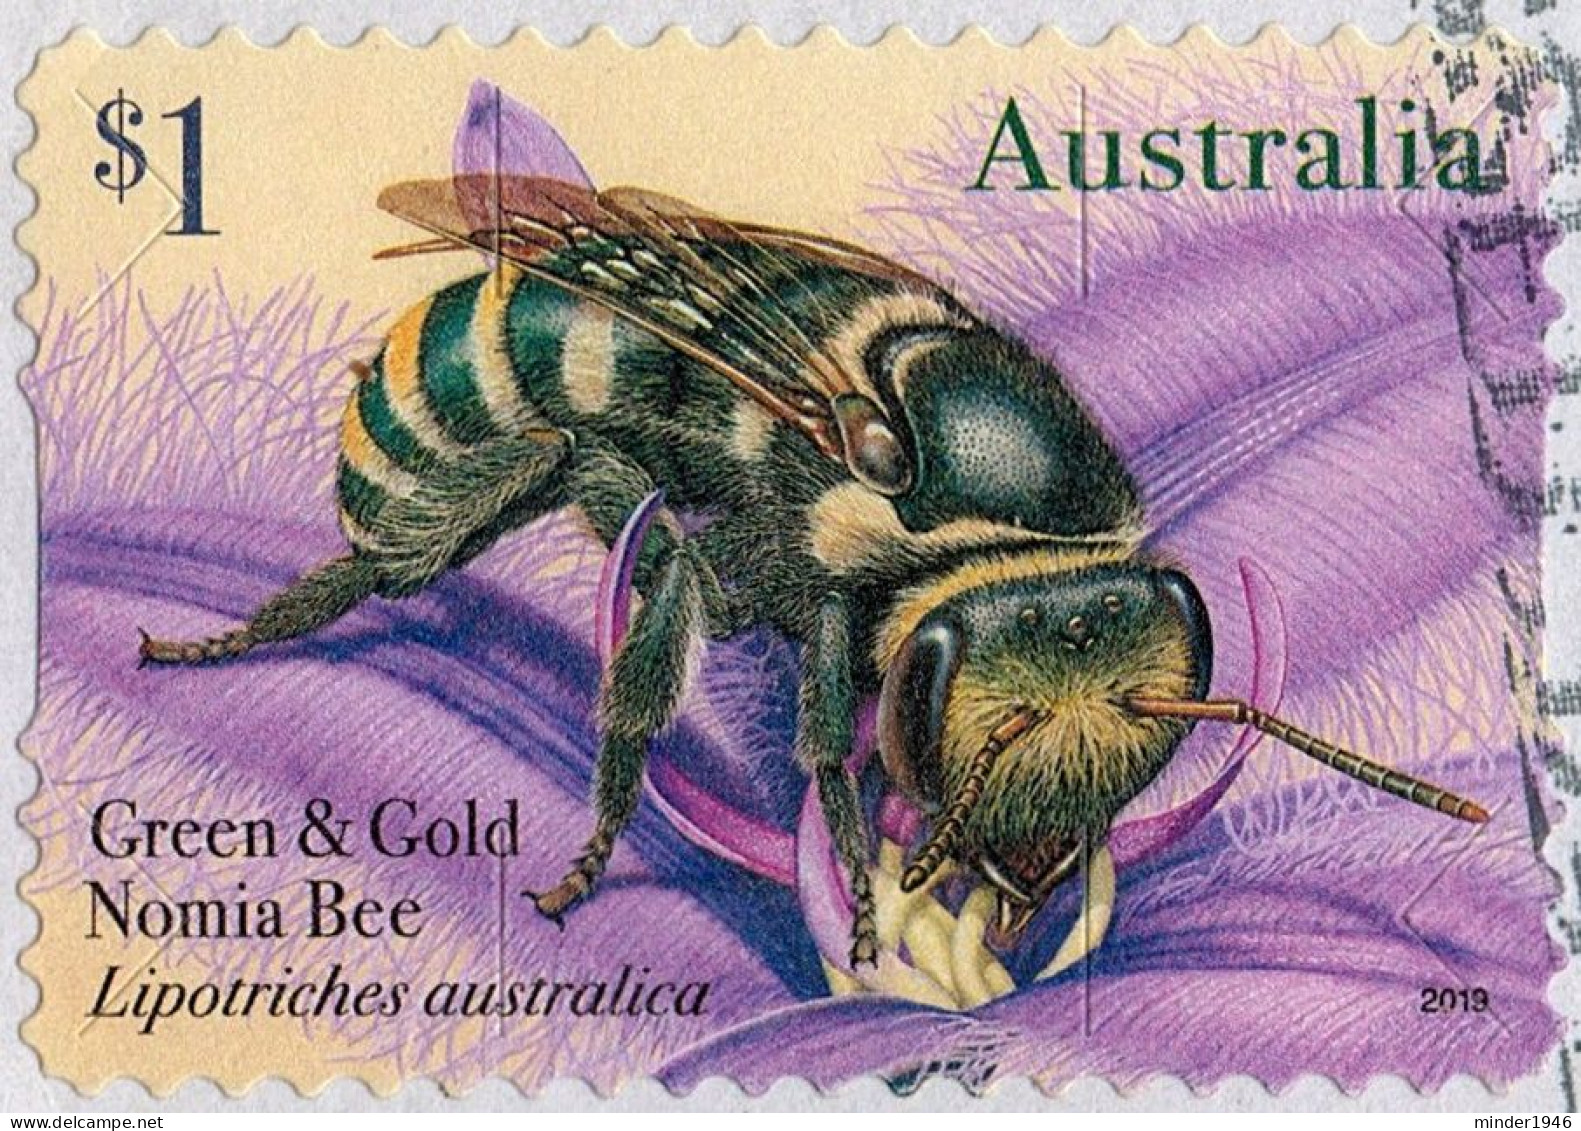 AUSTRALIA 2019 $1 Multicoloured, Native Bees-Green & Gold Nomia Bee Die-Cut Self Adhesive Used - Usados